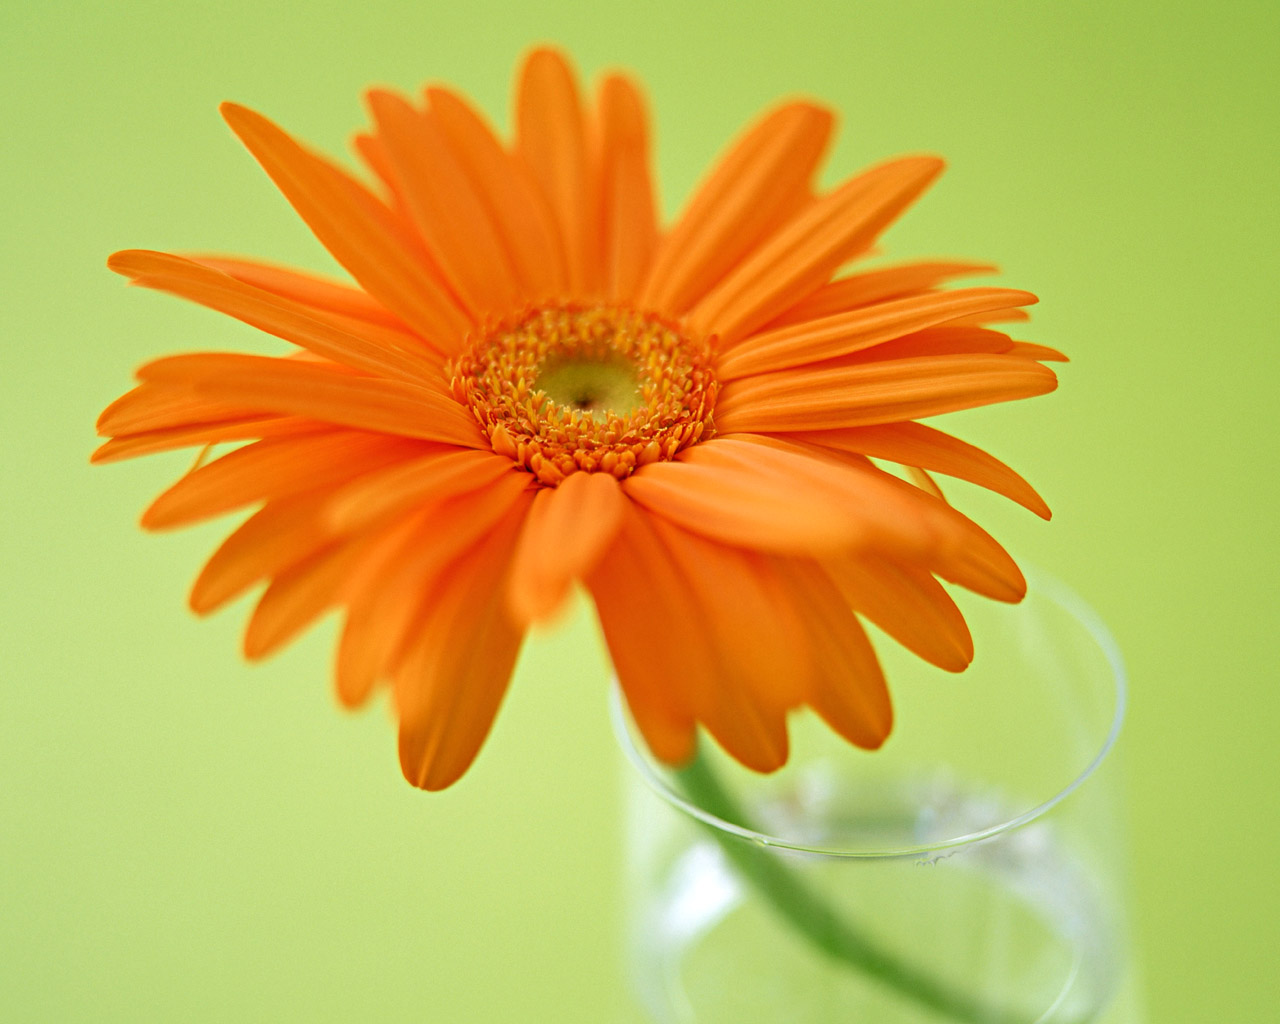 Gerber Daisy Wallpaper Images Pictures   Becuo 1280x1024